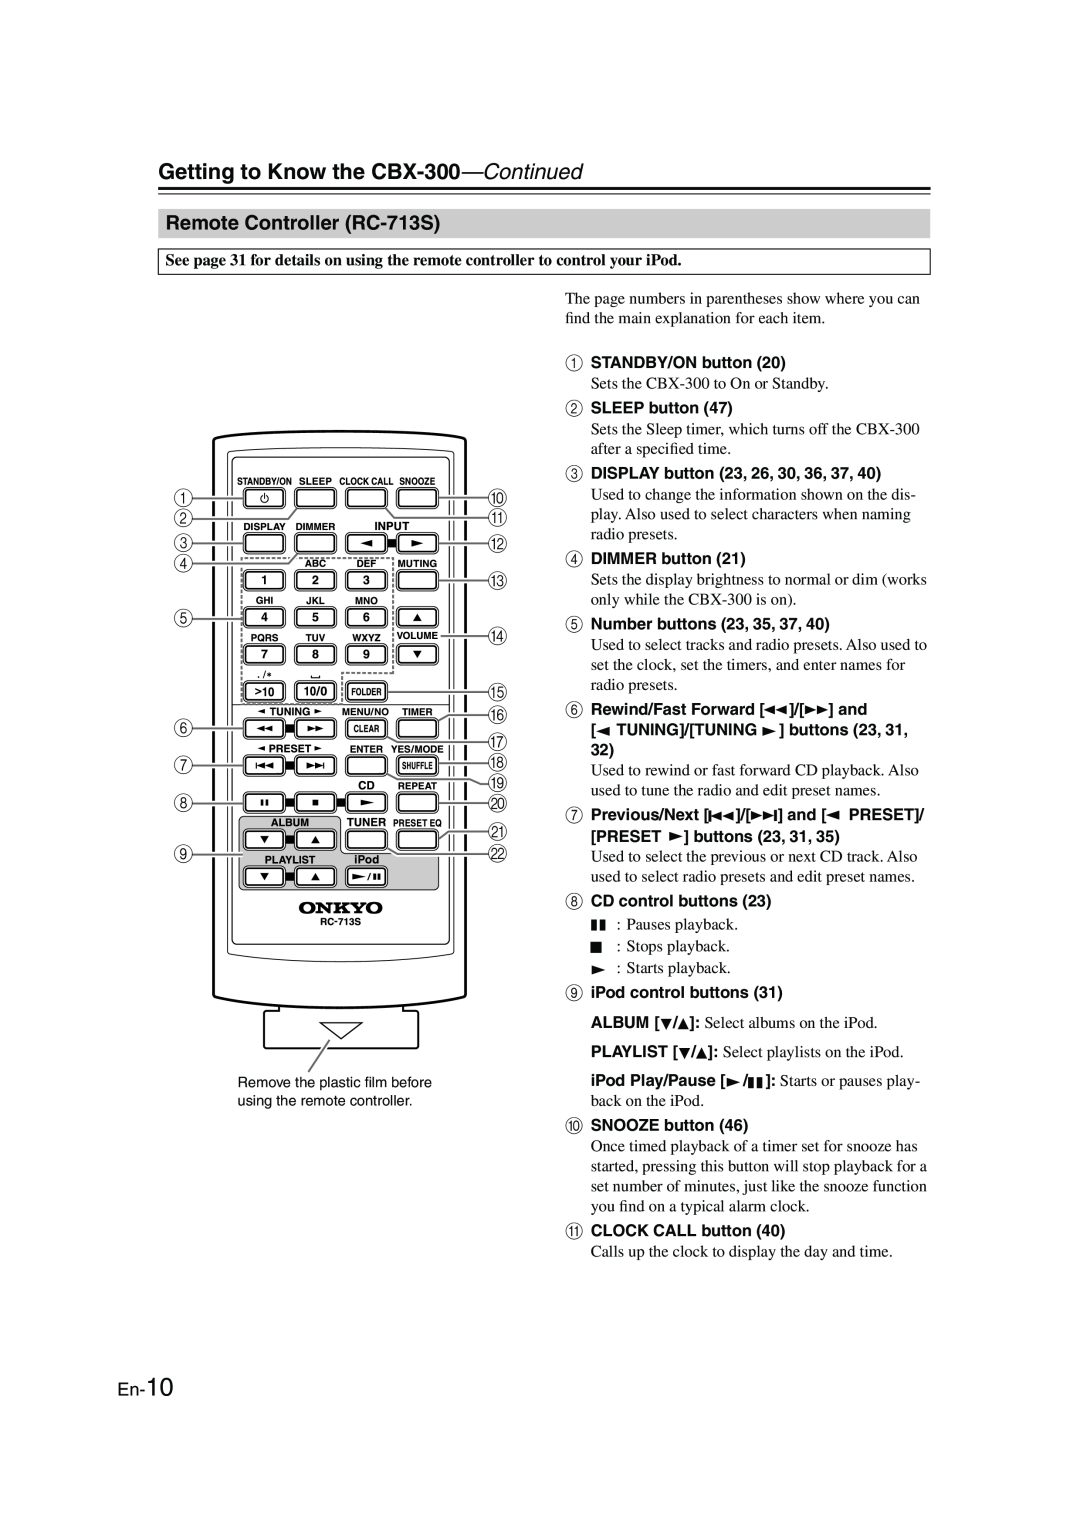 Onkyo instruction manual Remote Controller RC-713S, Getting to Know the CBX-300—Continued 